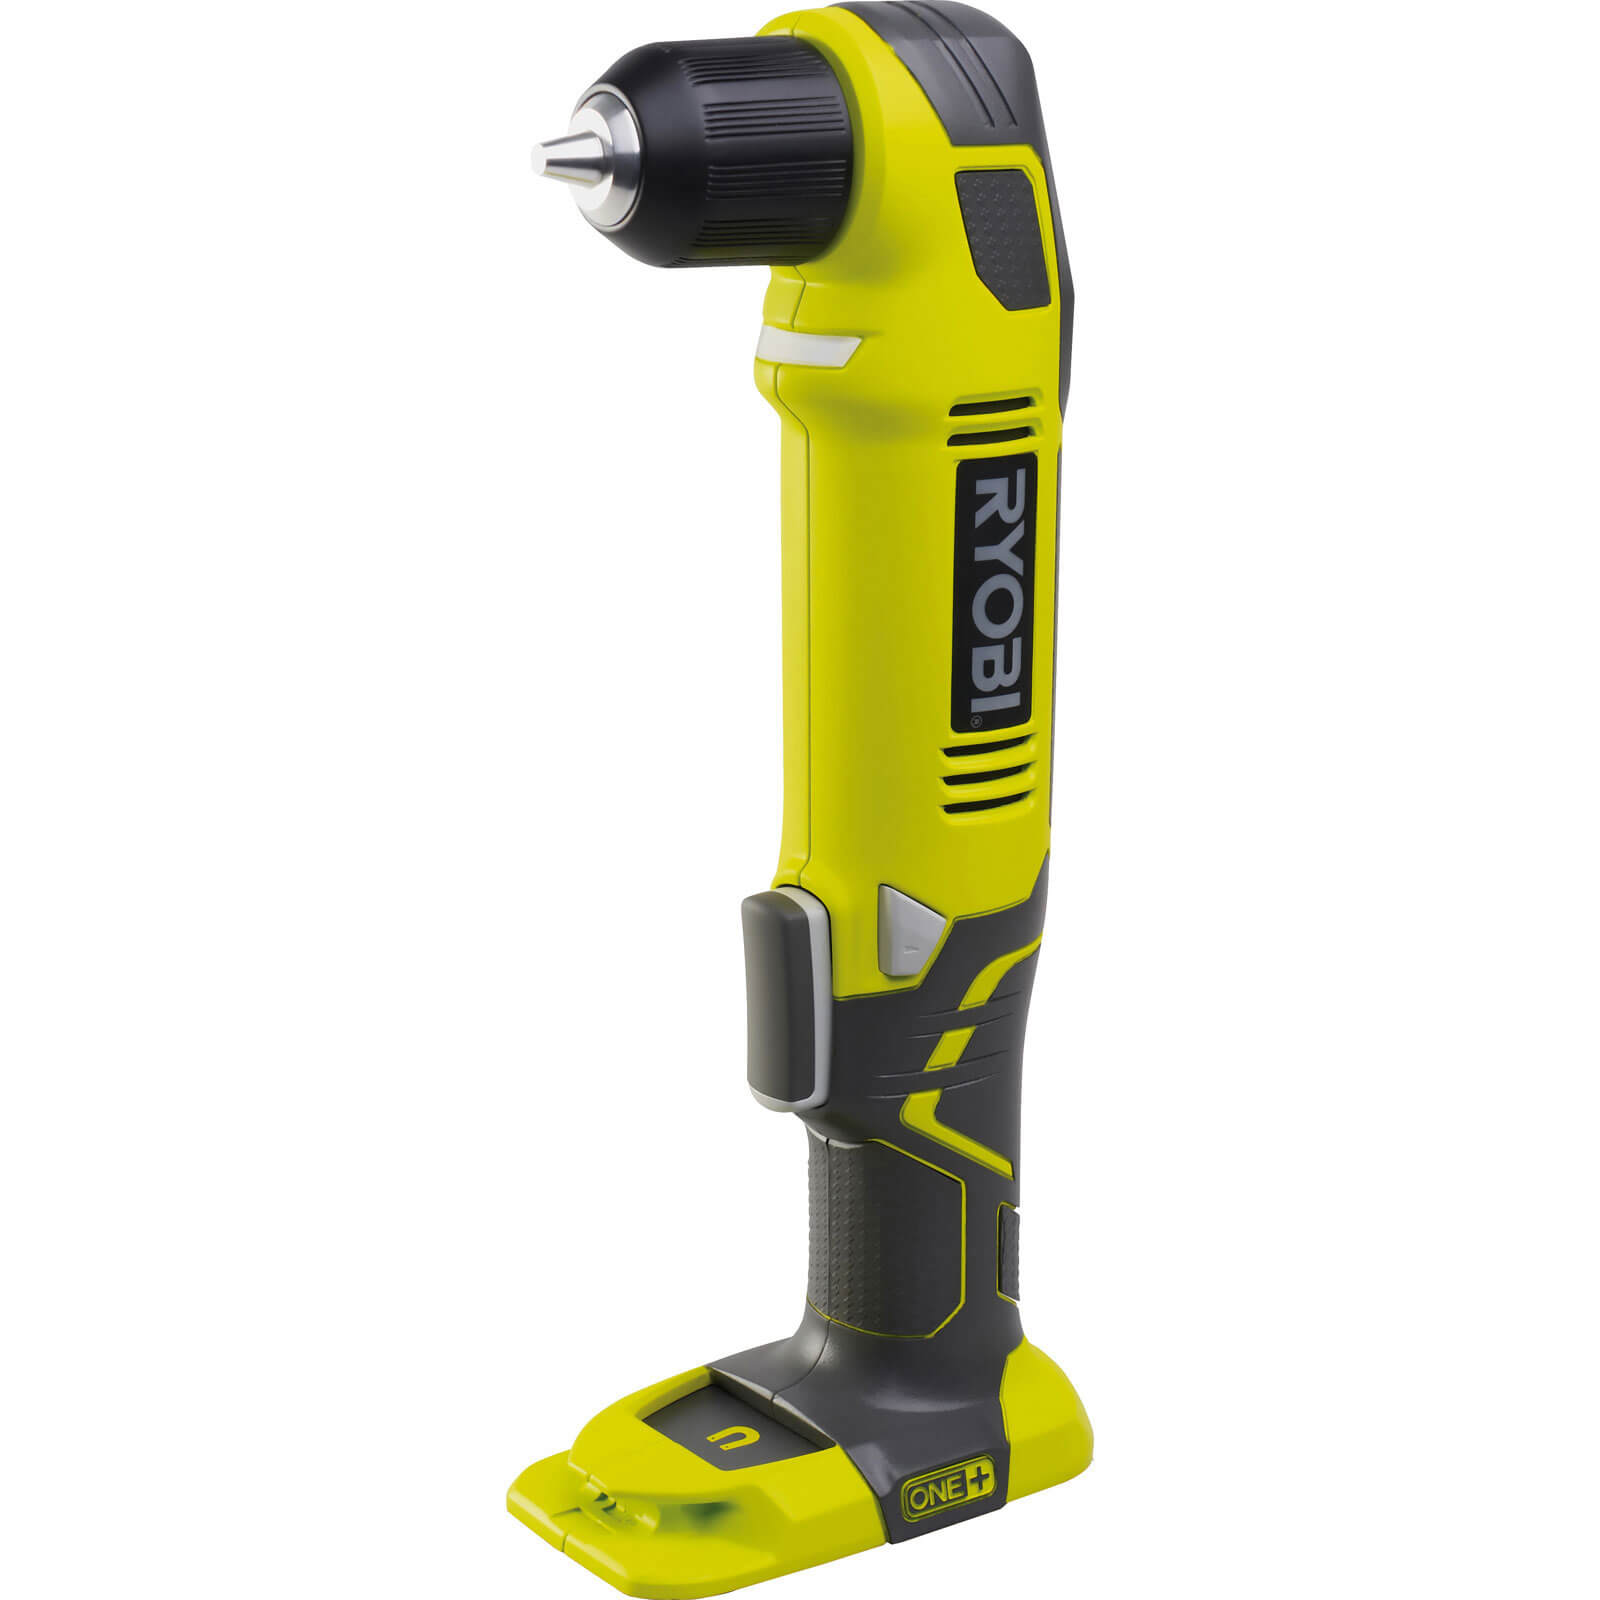 Ryobi RAD1801M ONE+ 18v Cordless Angle Drill without Battery or Charger - Requires Separate ONE+ Bat